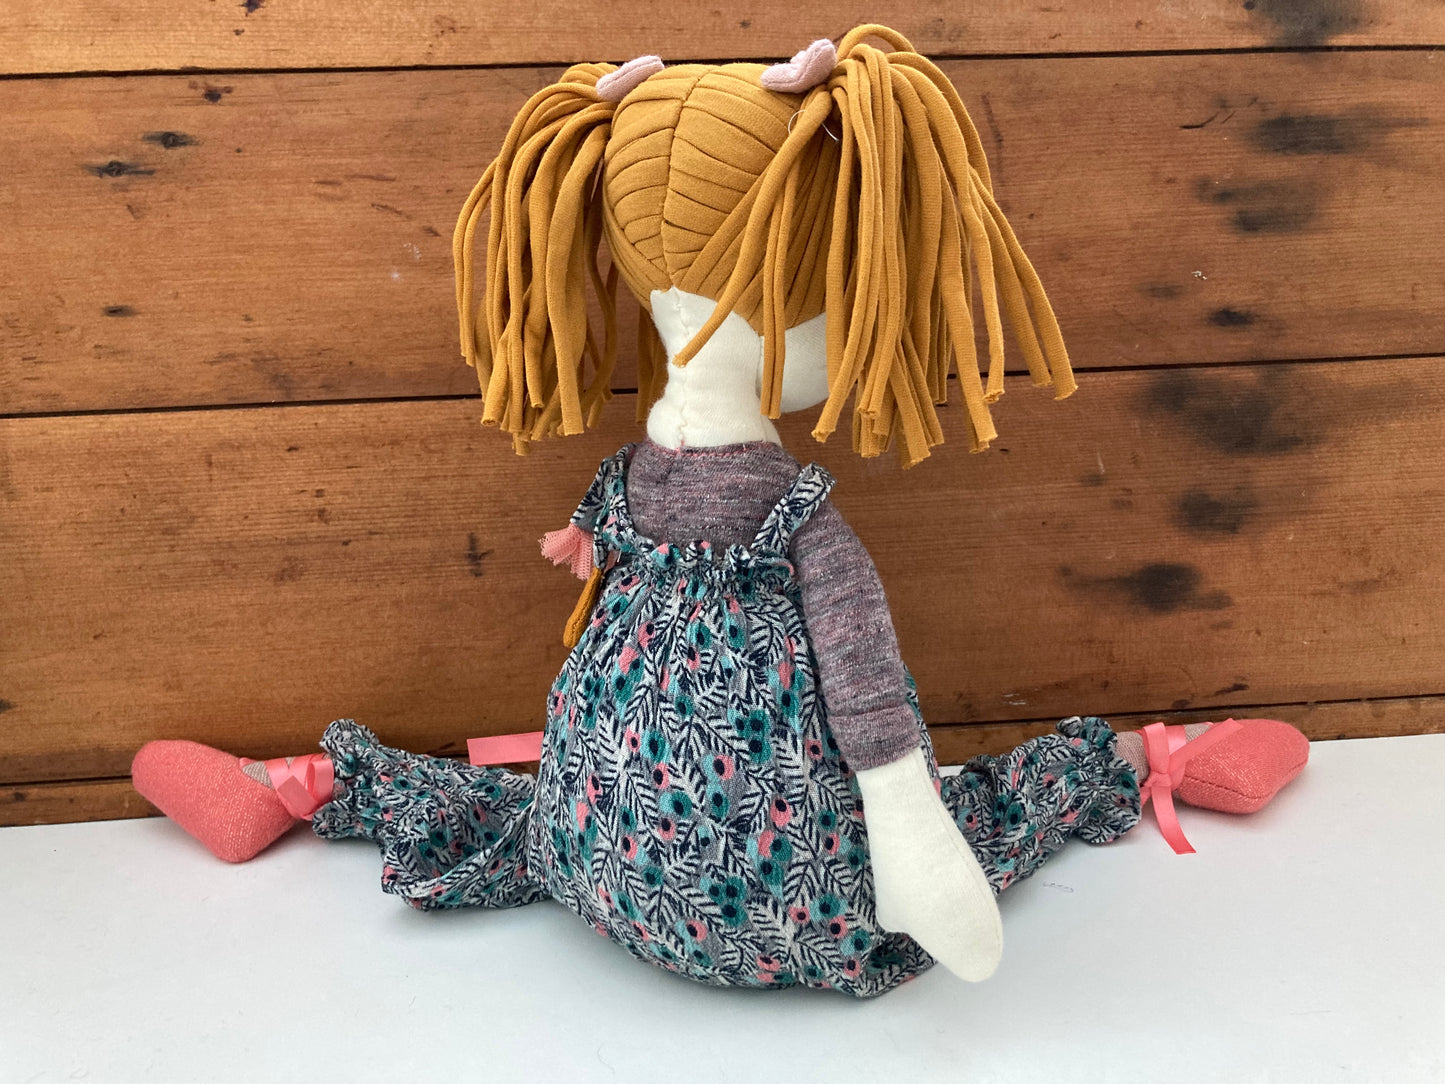 Soft Doll - RAG DOLL, in overalls (18inches)